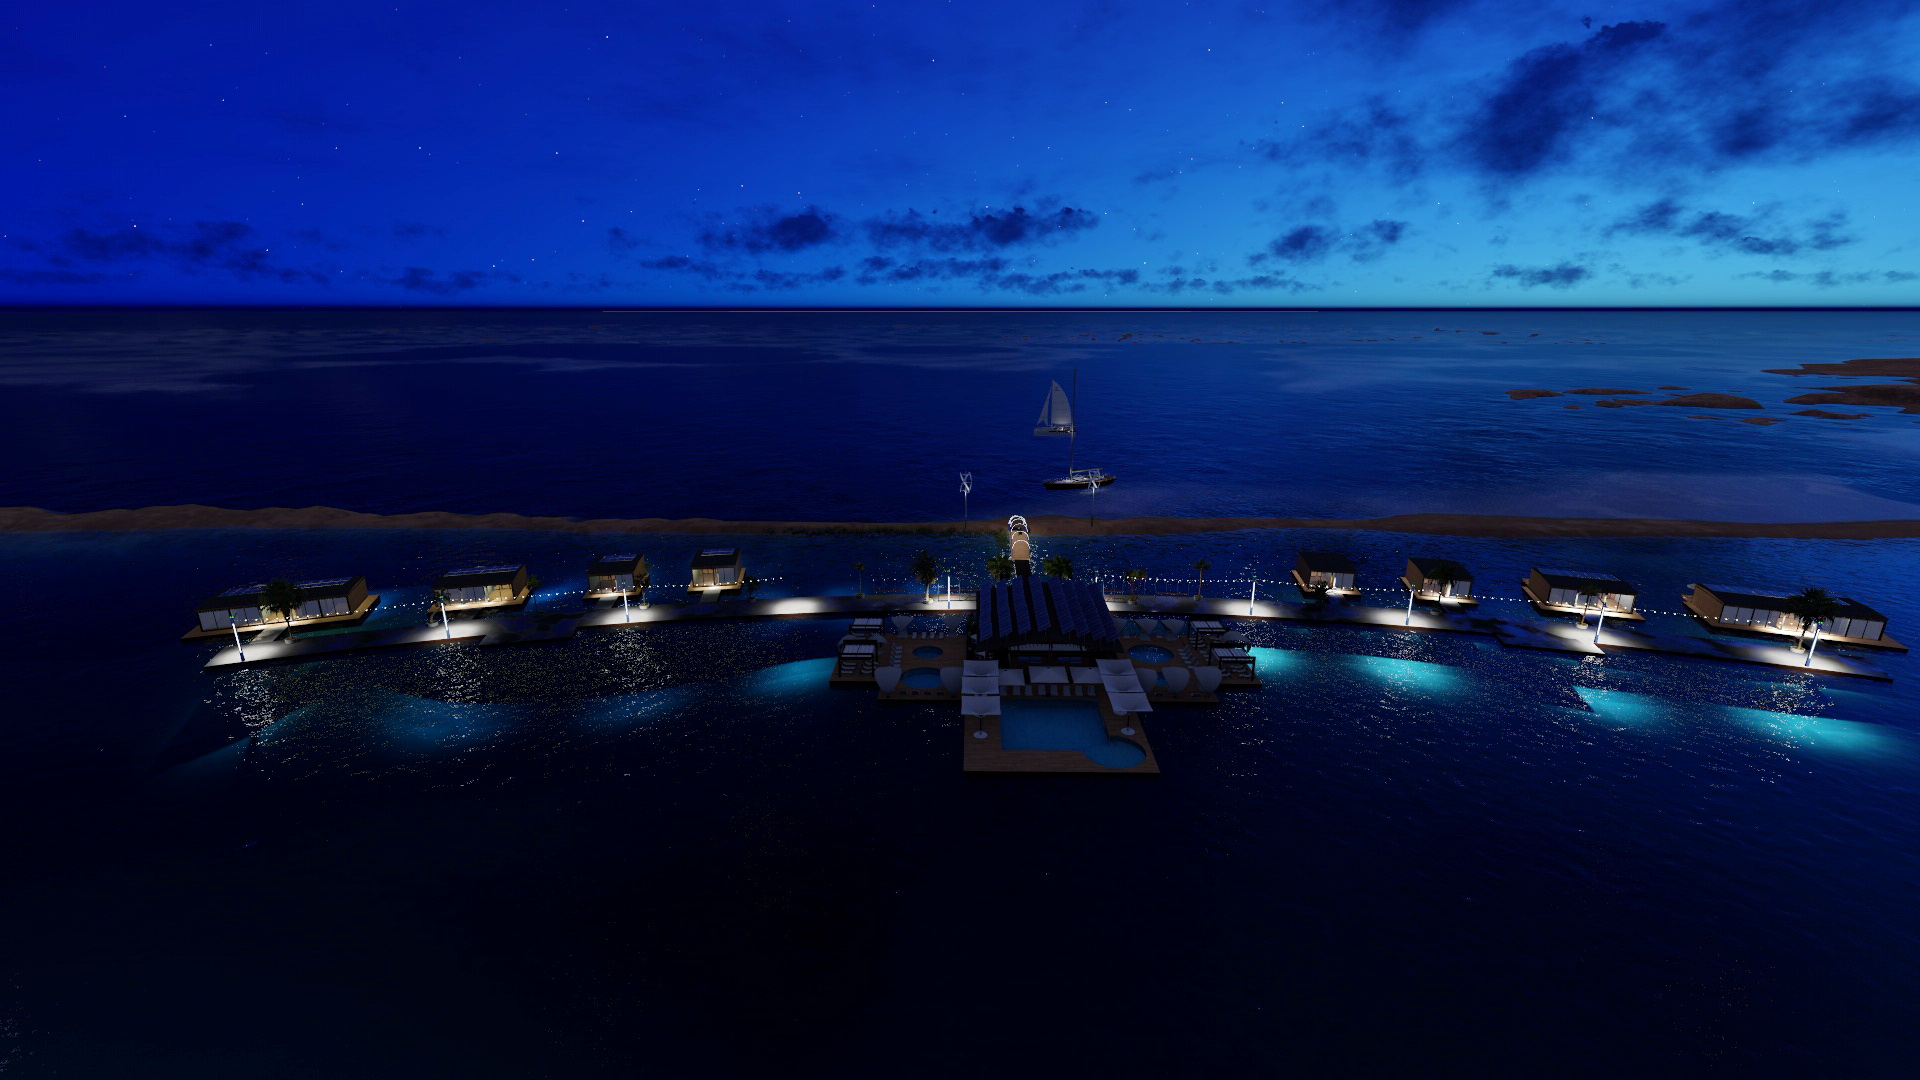 skyline floating resort in 3d max Other image